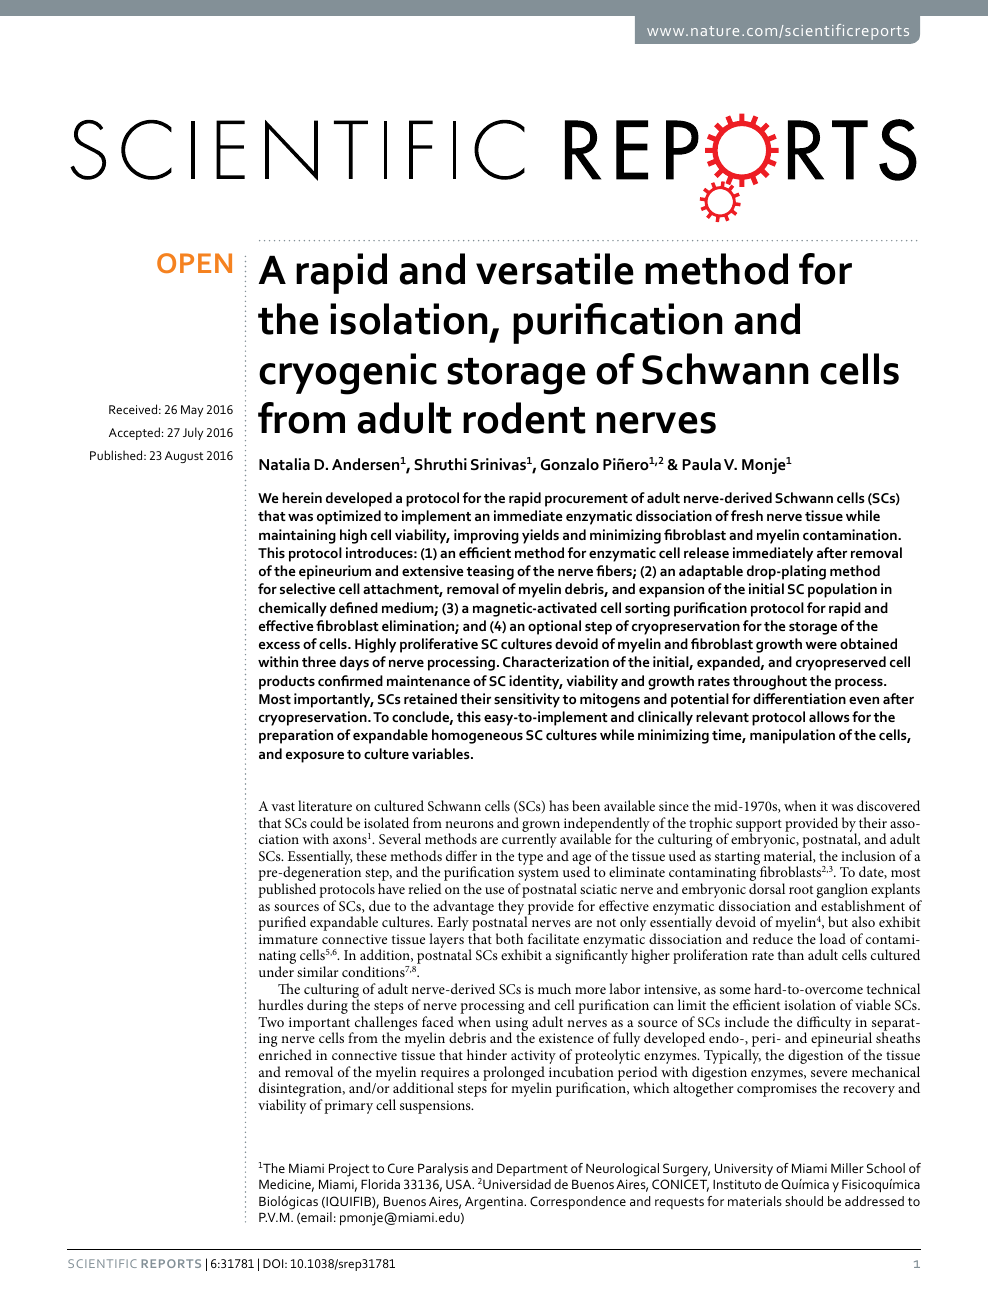 A Rapid And Versatile Method For The Isolation Purification And Cryogenic Storage Of Schwann Cells From Adult Rodent Nerves Topic Of Research Paper In Biological Sciences Download Scholarly Article Pdf And